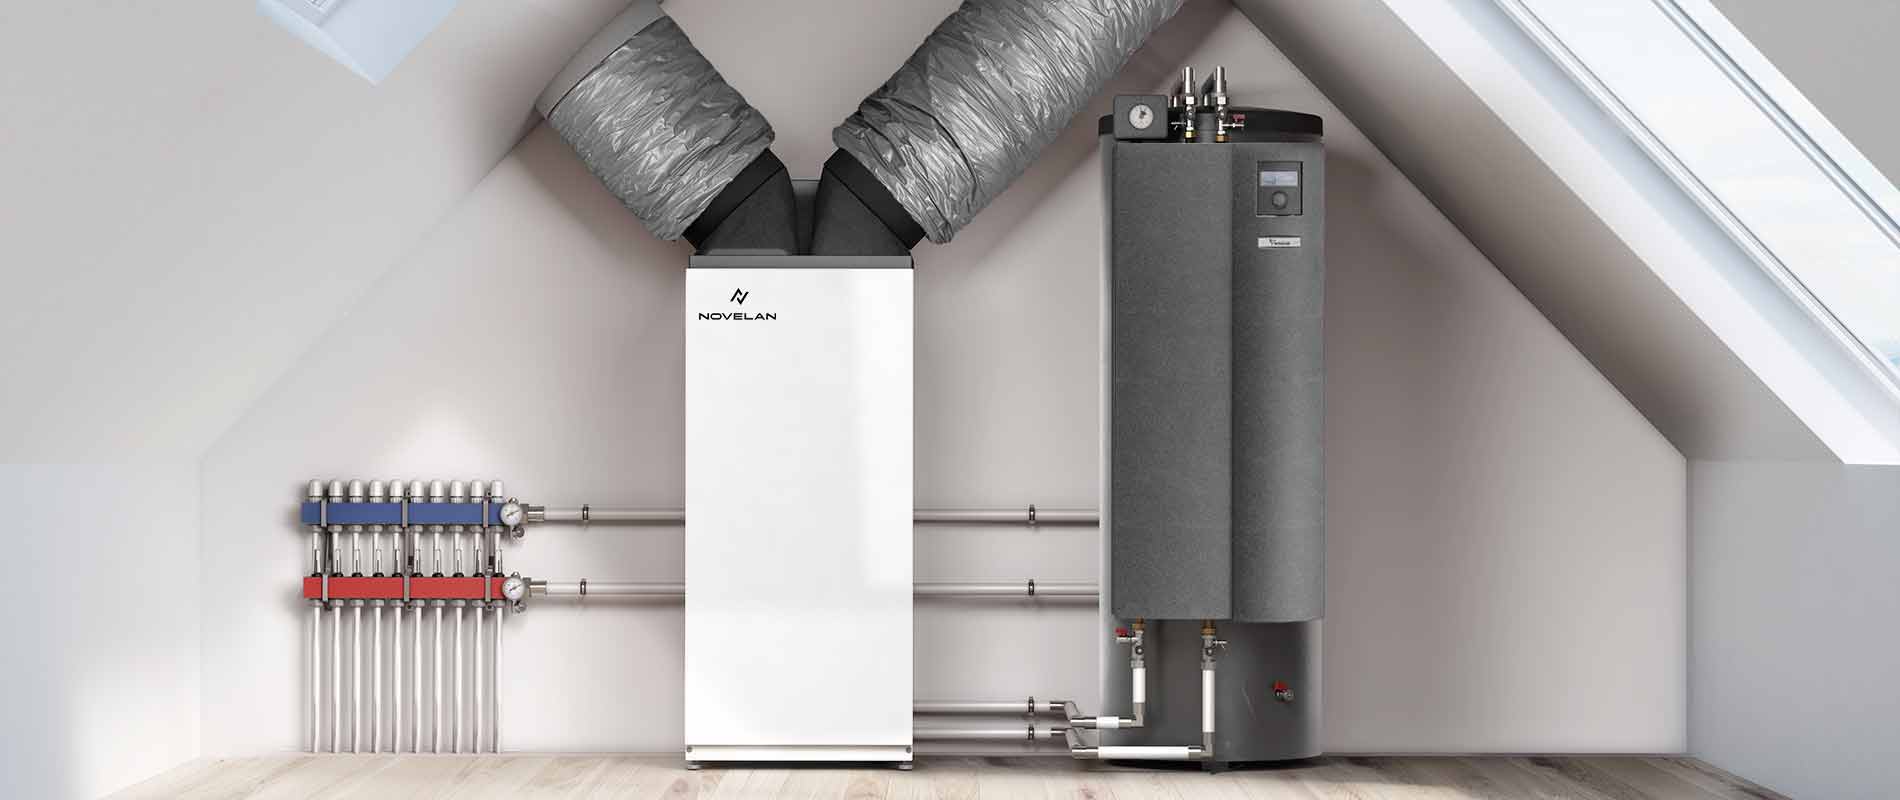 The heat pump Polaris can be seen installed under a sloping roof, with a Compact station on its right and pipes extending into the wall on the left.